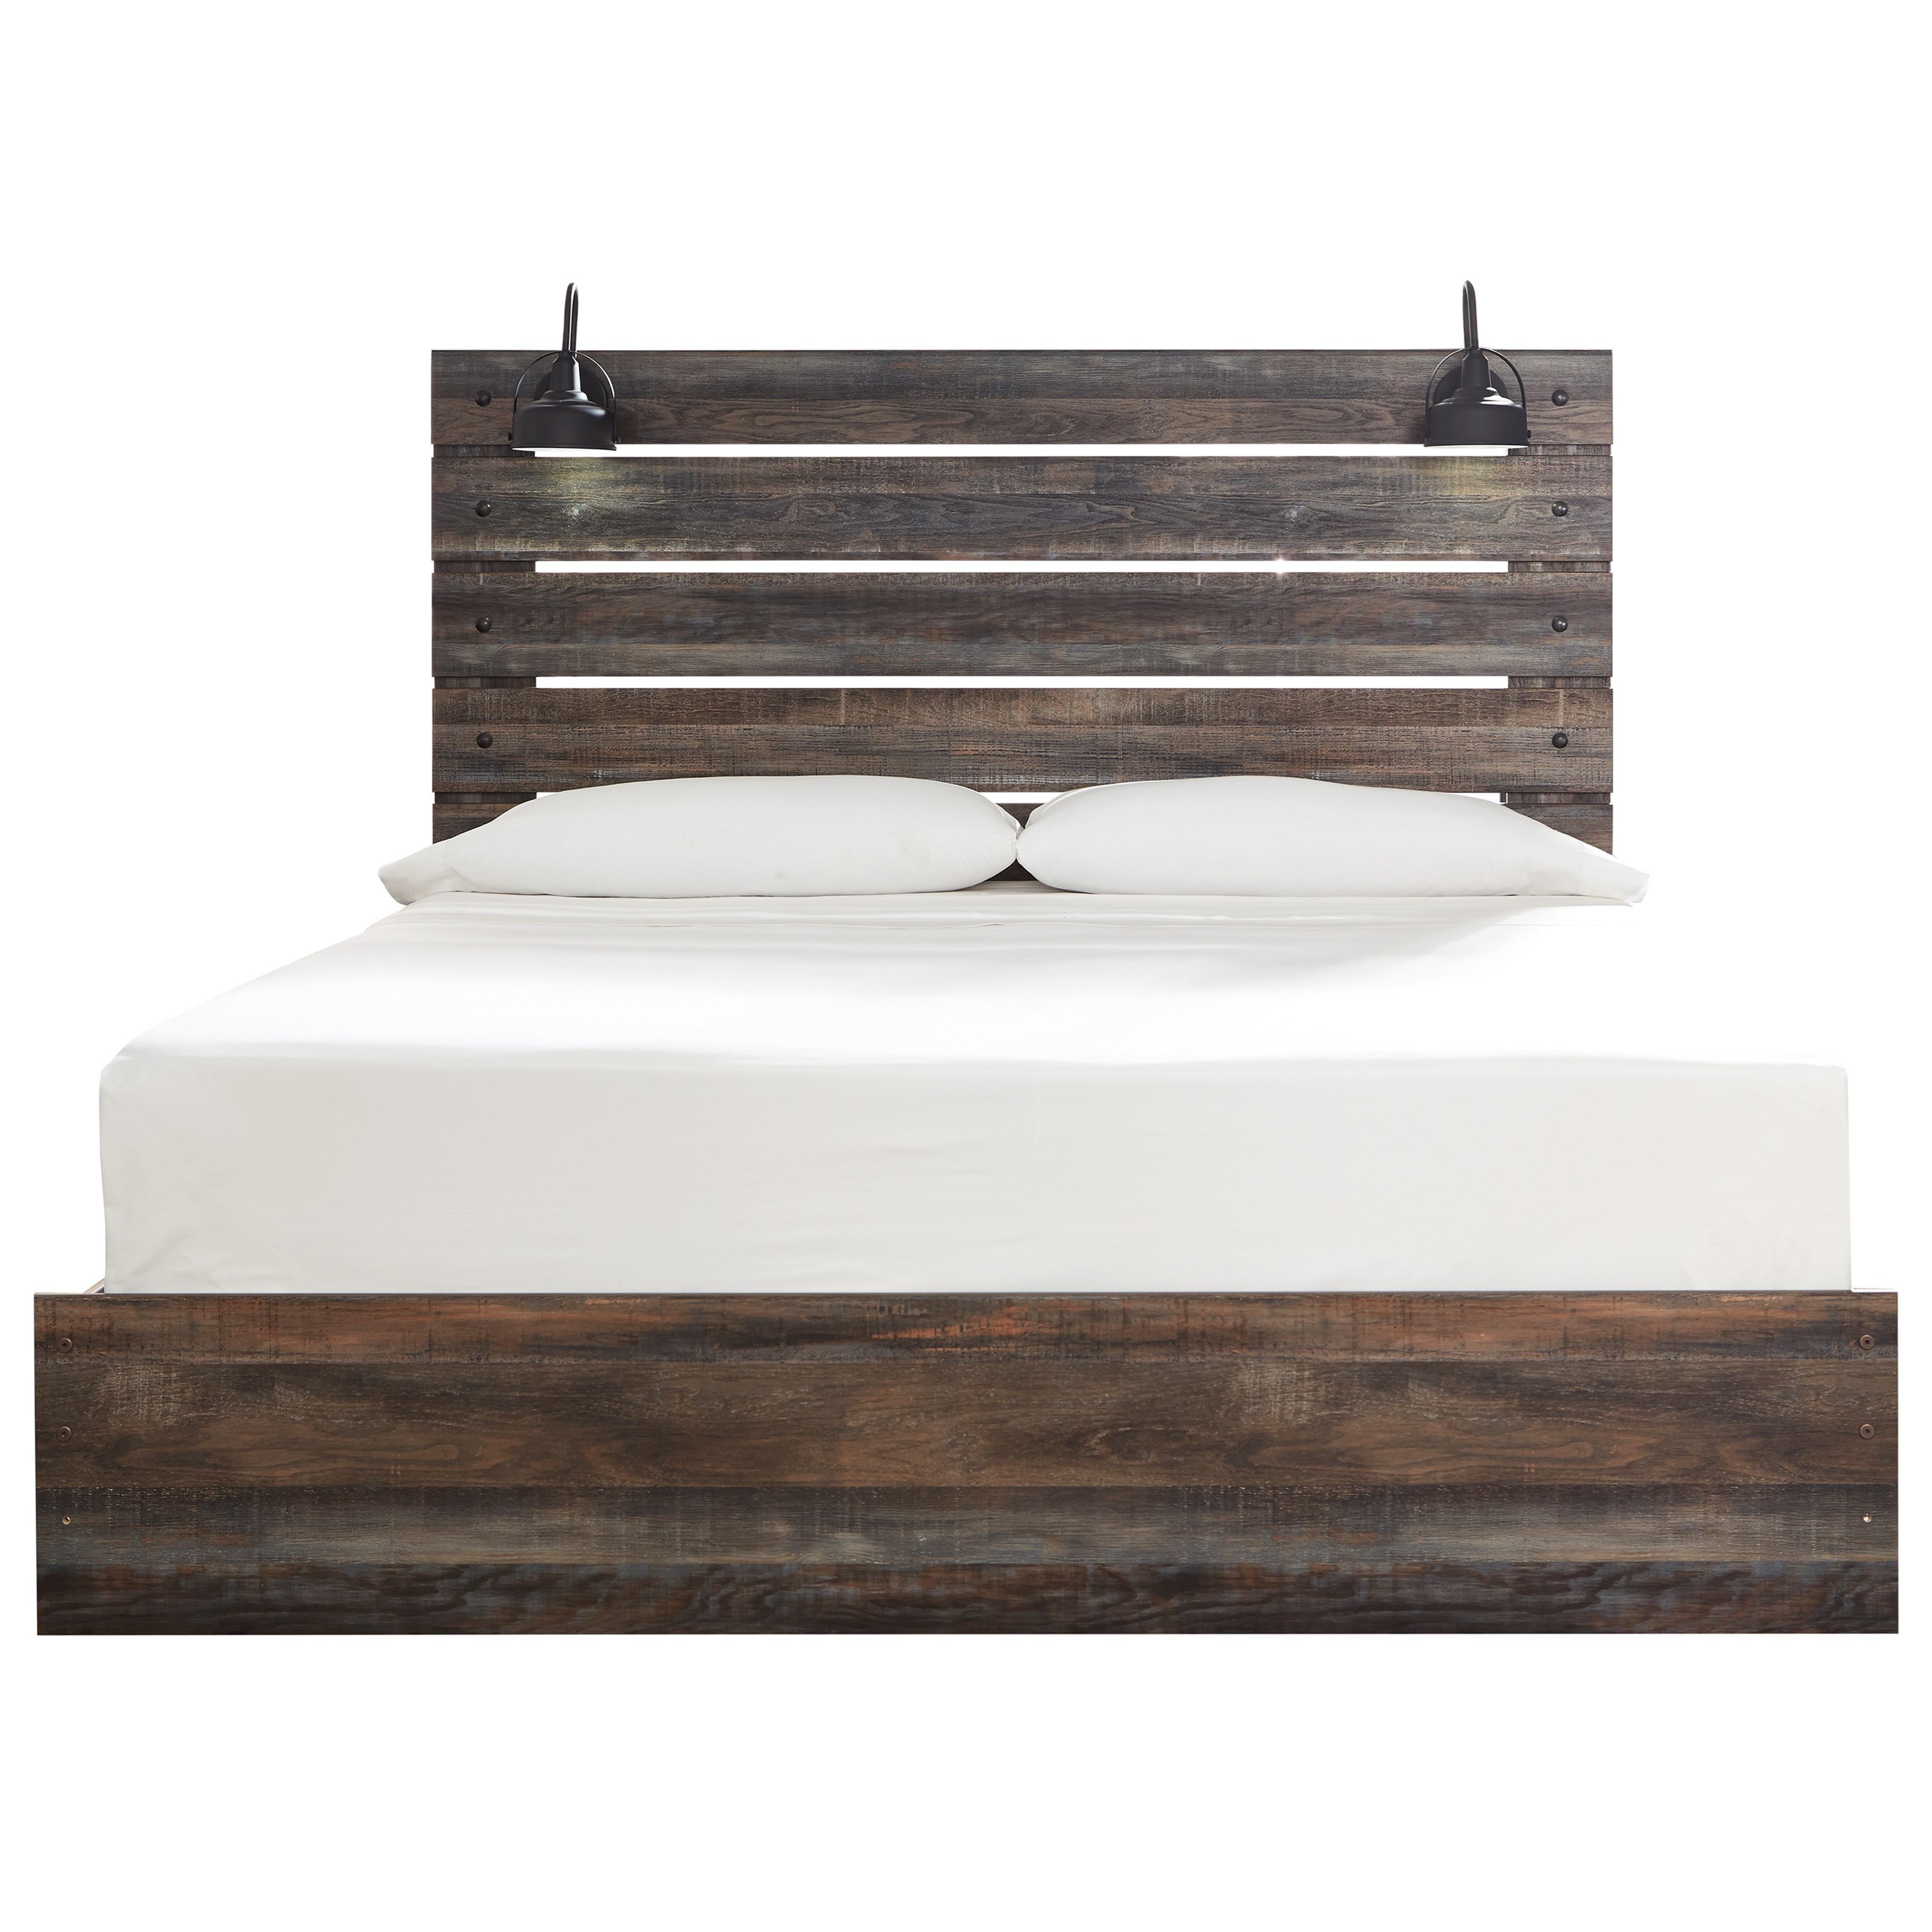 beds with lights in headboard